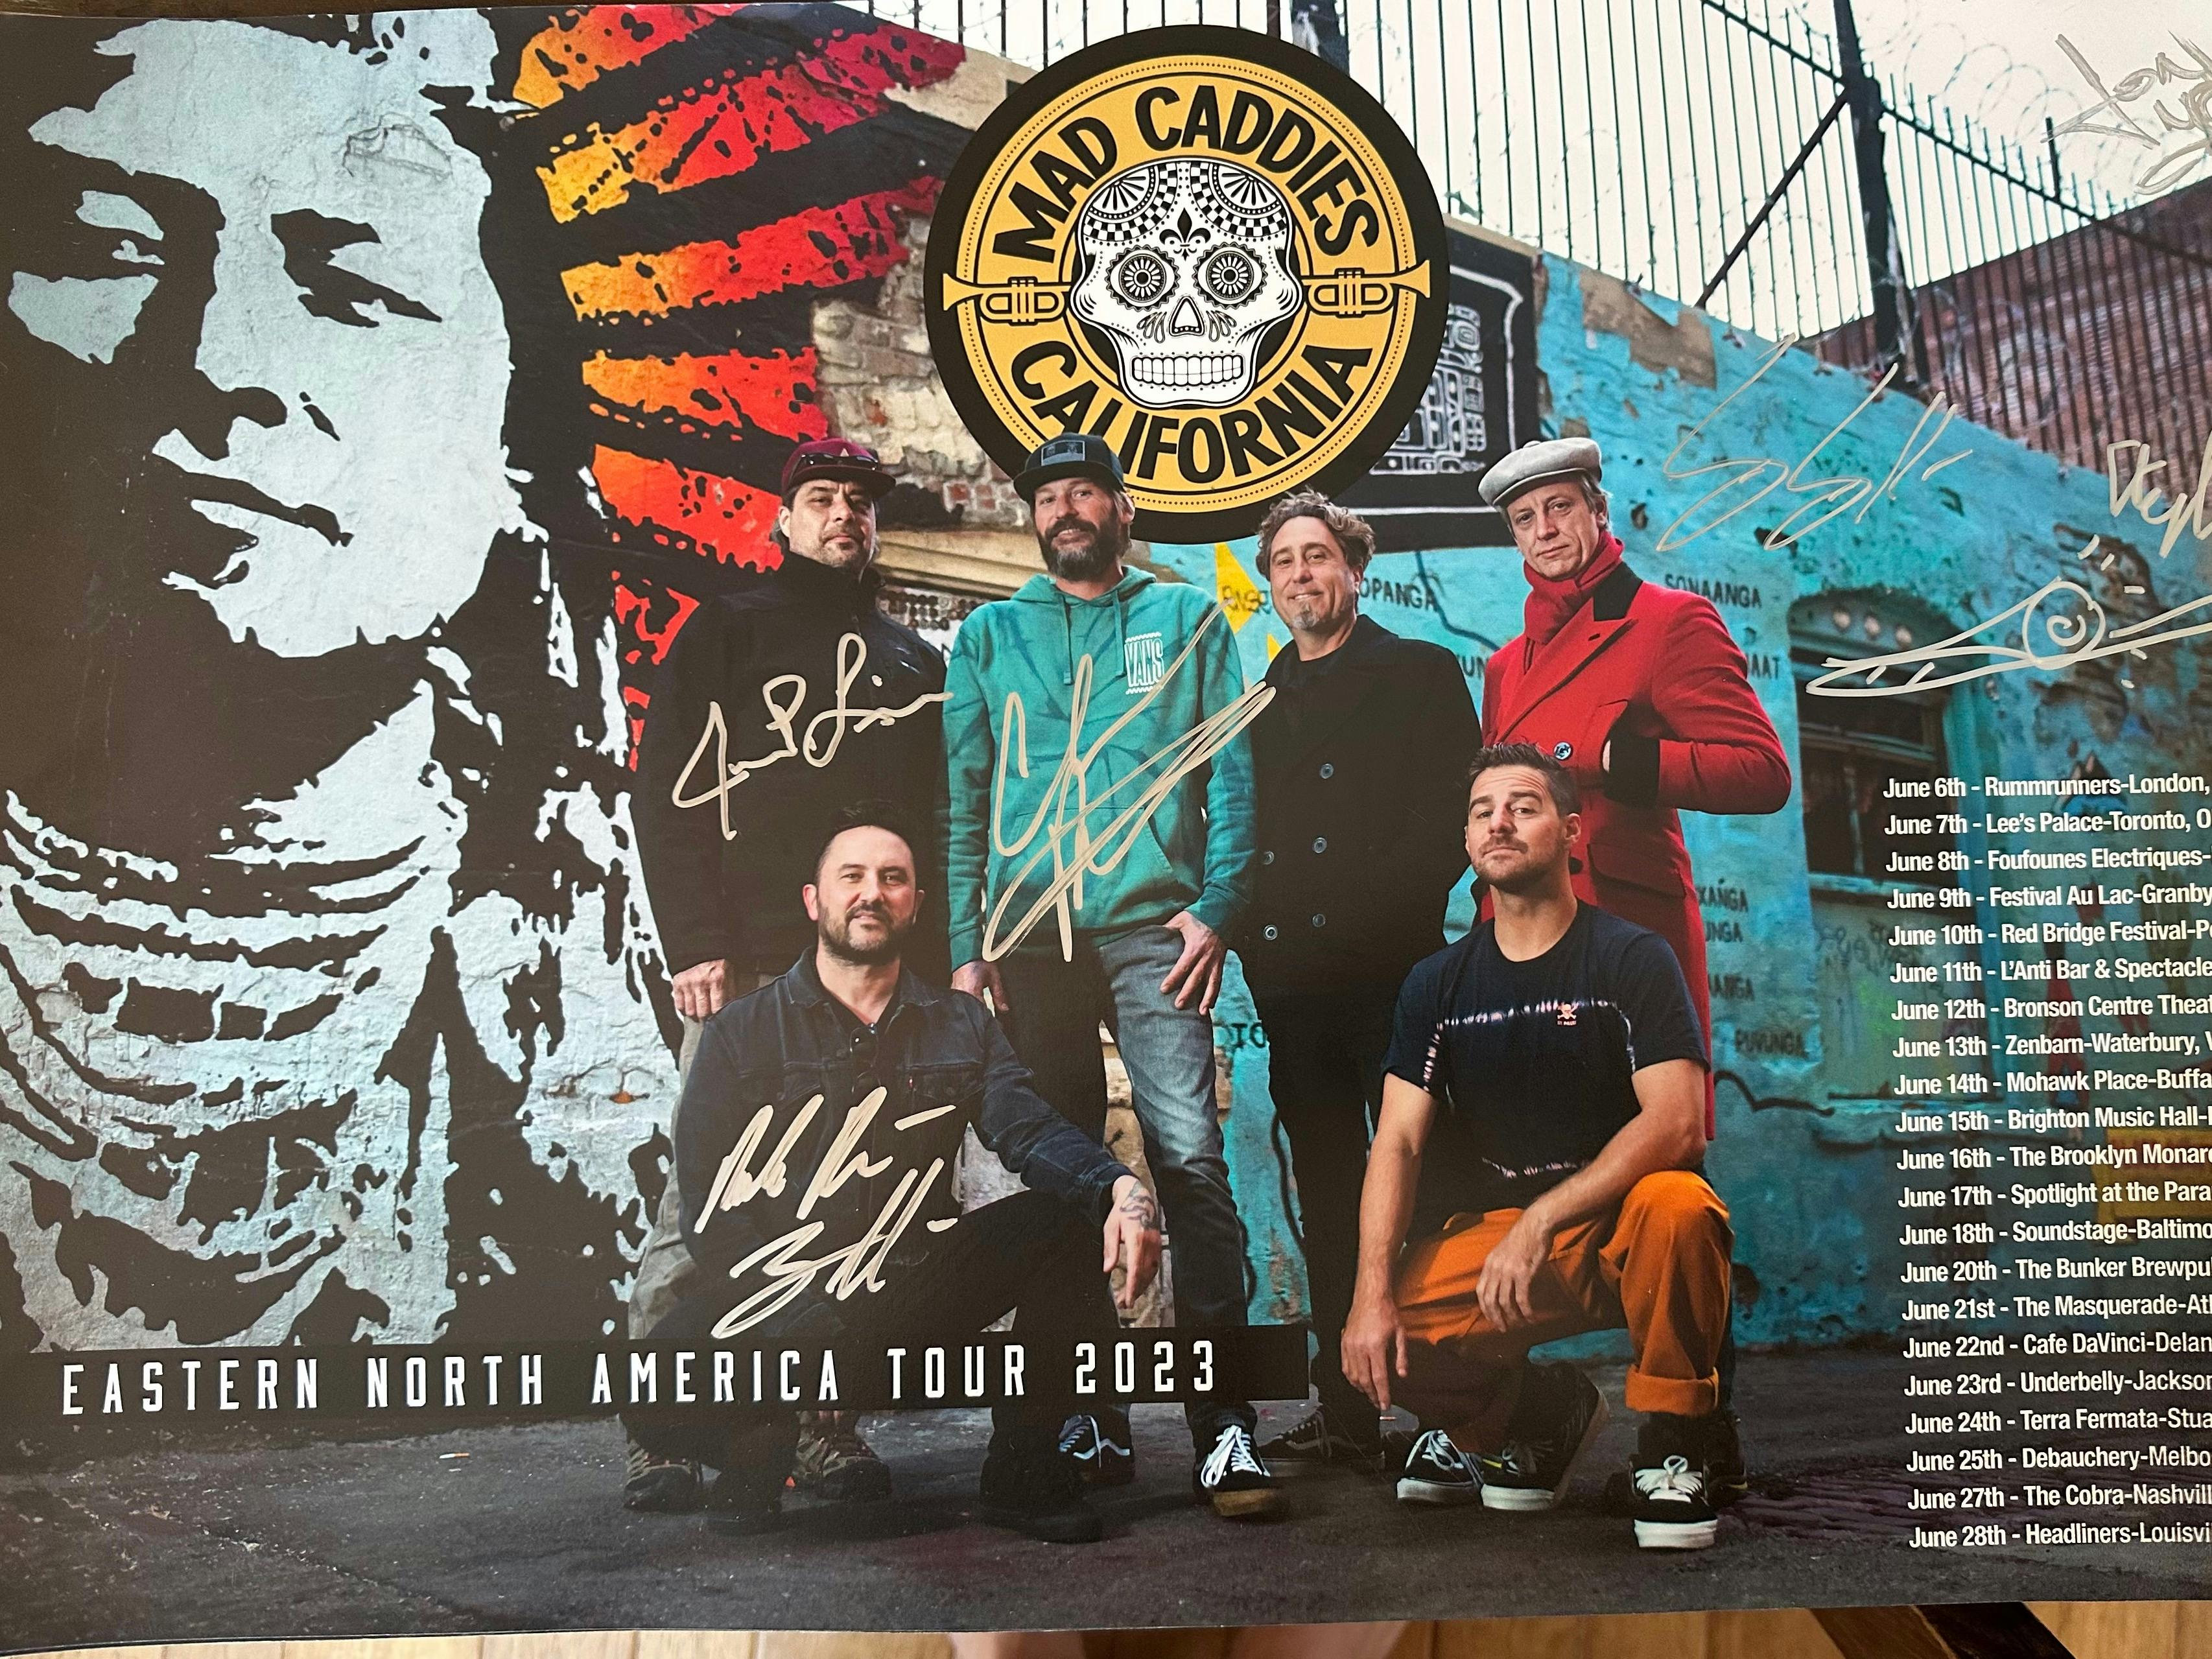 Signed Collectible Tour Poster (Mailed to you)